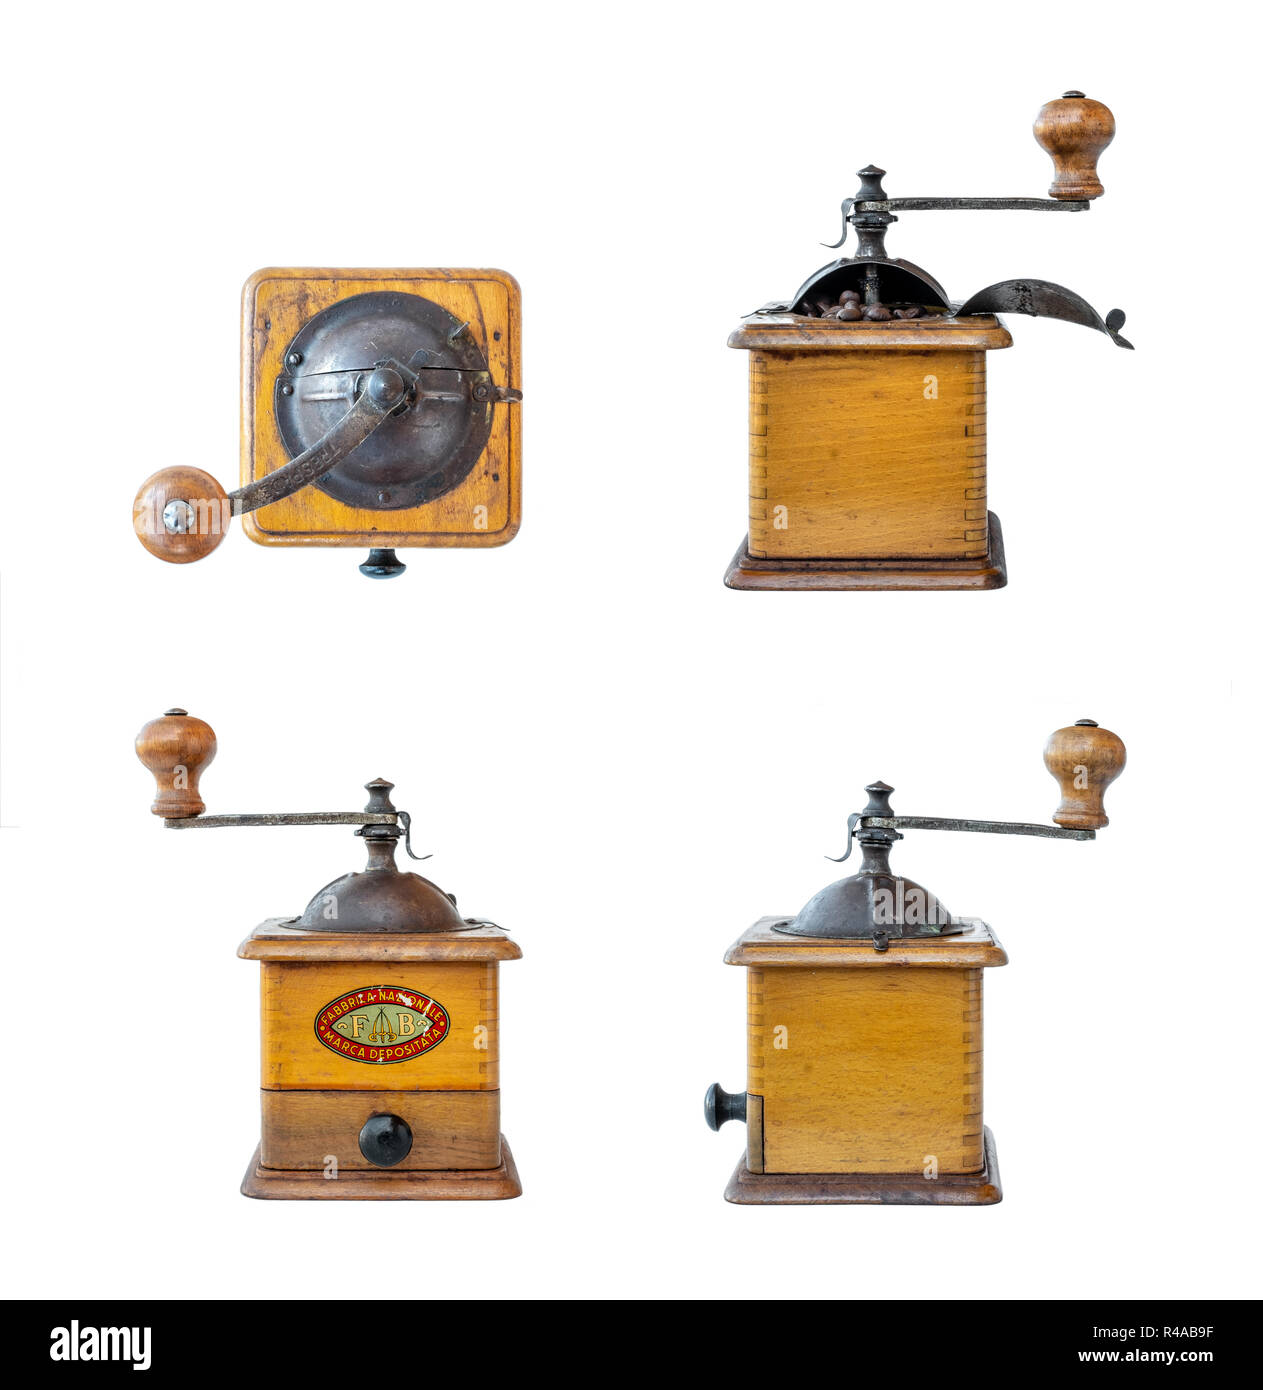 Old Italian traditional and manual coffee grinder Stock Photo